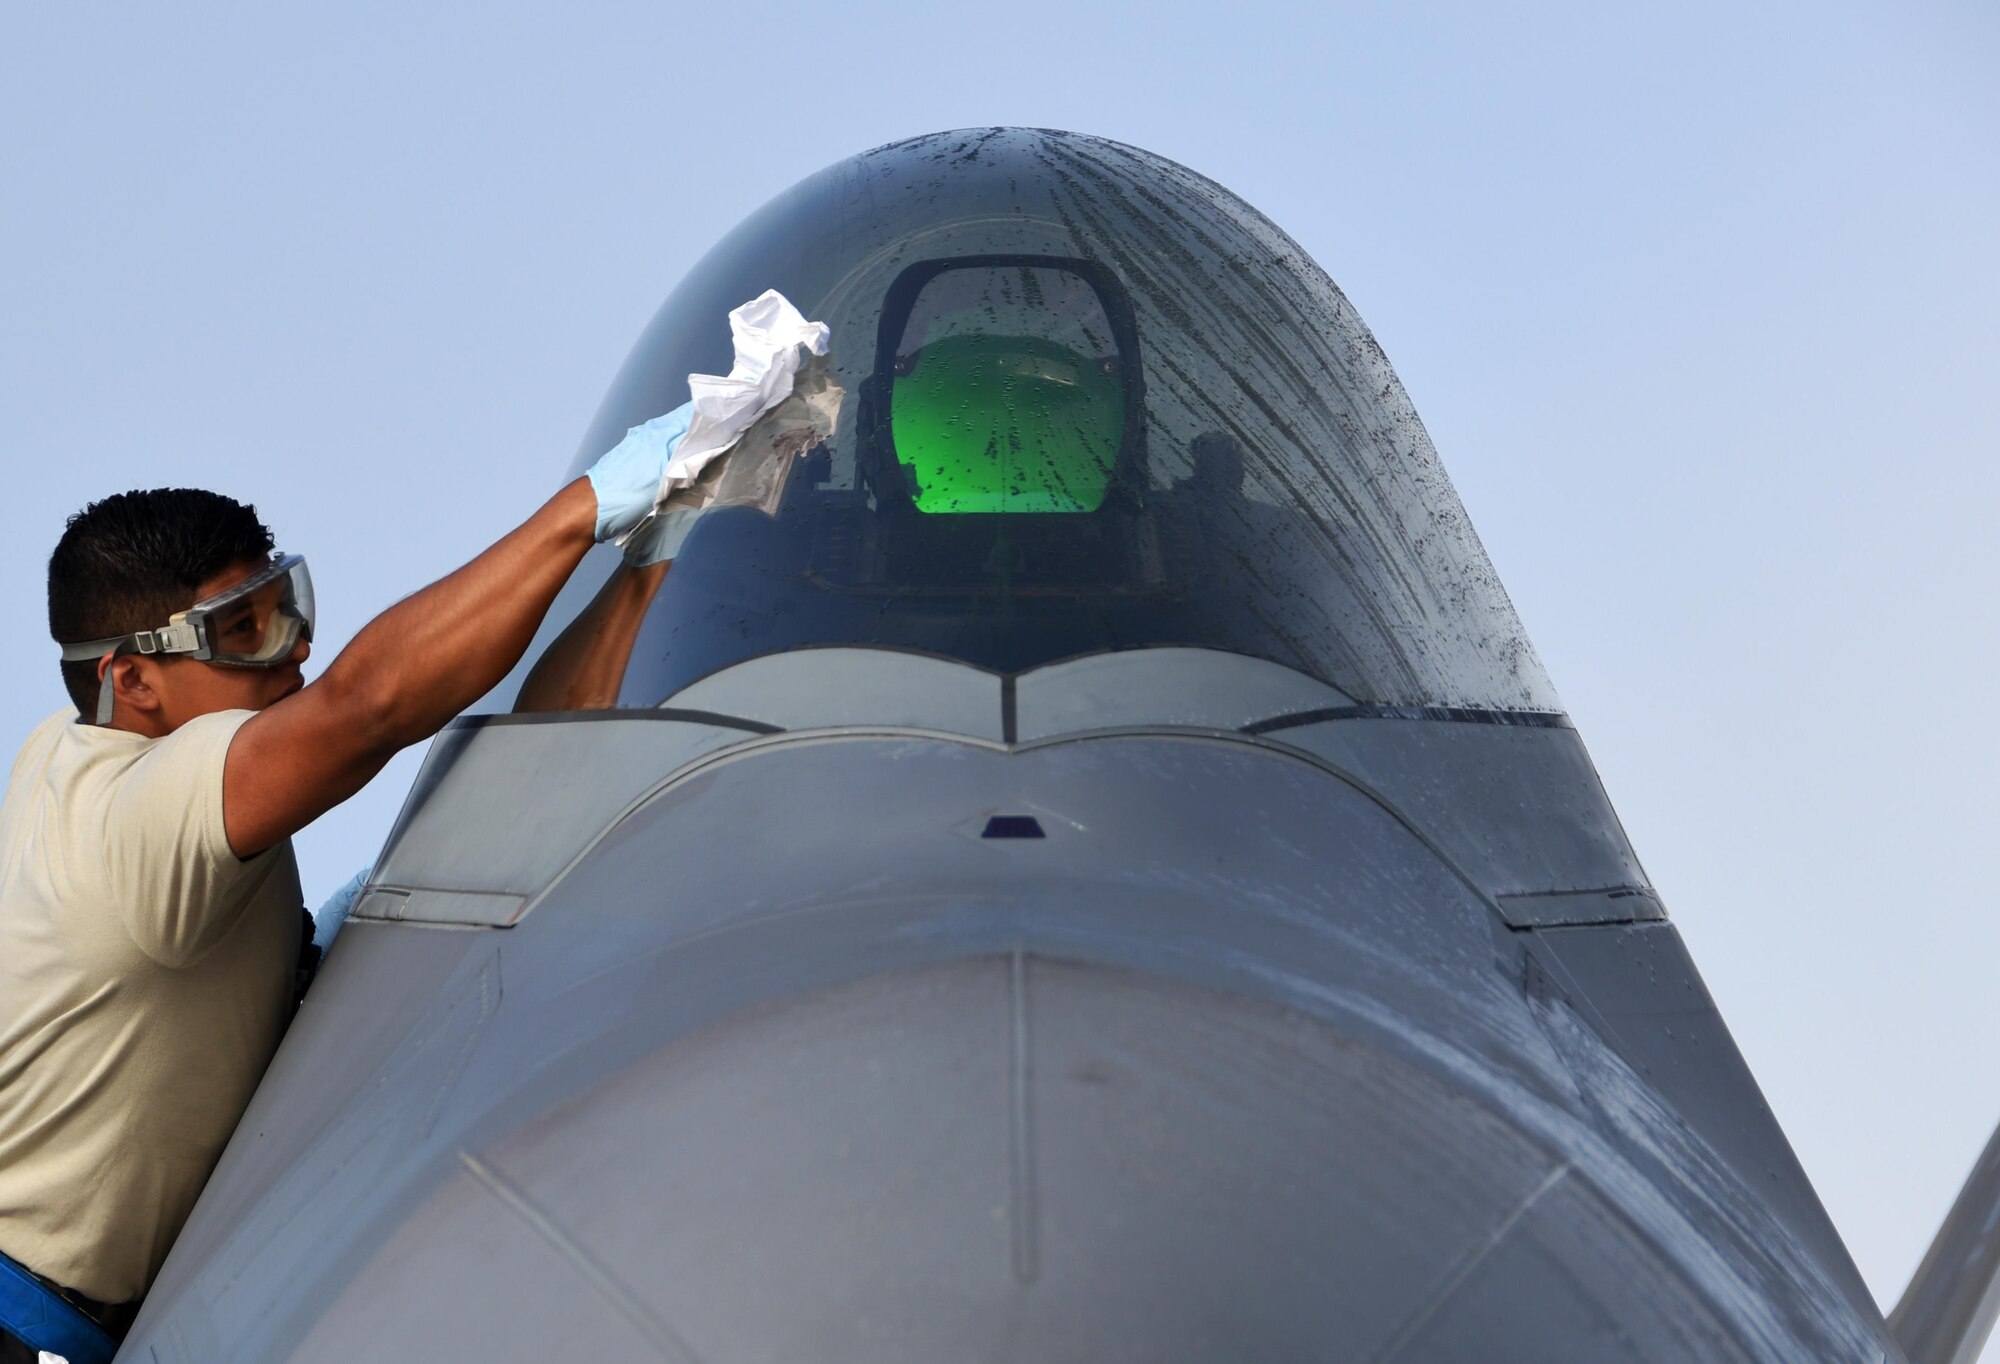 U.S. Air Force Airman 1st Class Andrew Alcozer, 3rd Aircraft Maintenance Squadron crew chief, cleans the canopy of a 525th Fighter Squadron F-22 Raptor at Tyndall Air Force Base, Fla., Nov. 7, 2017. Tyndall AFB is the host location for Checkered Flag 18-1, a large-scale aerial exercise designed to integrate fourth and fifth-generation airframes while providing a platform for maintenance teams to be evaluated. (U.S. Air Force photo by Airman 1st Class Isaiah J. Soliz/Released)